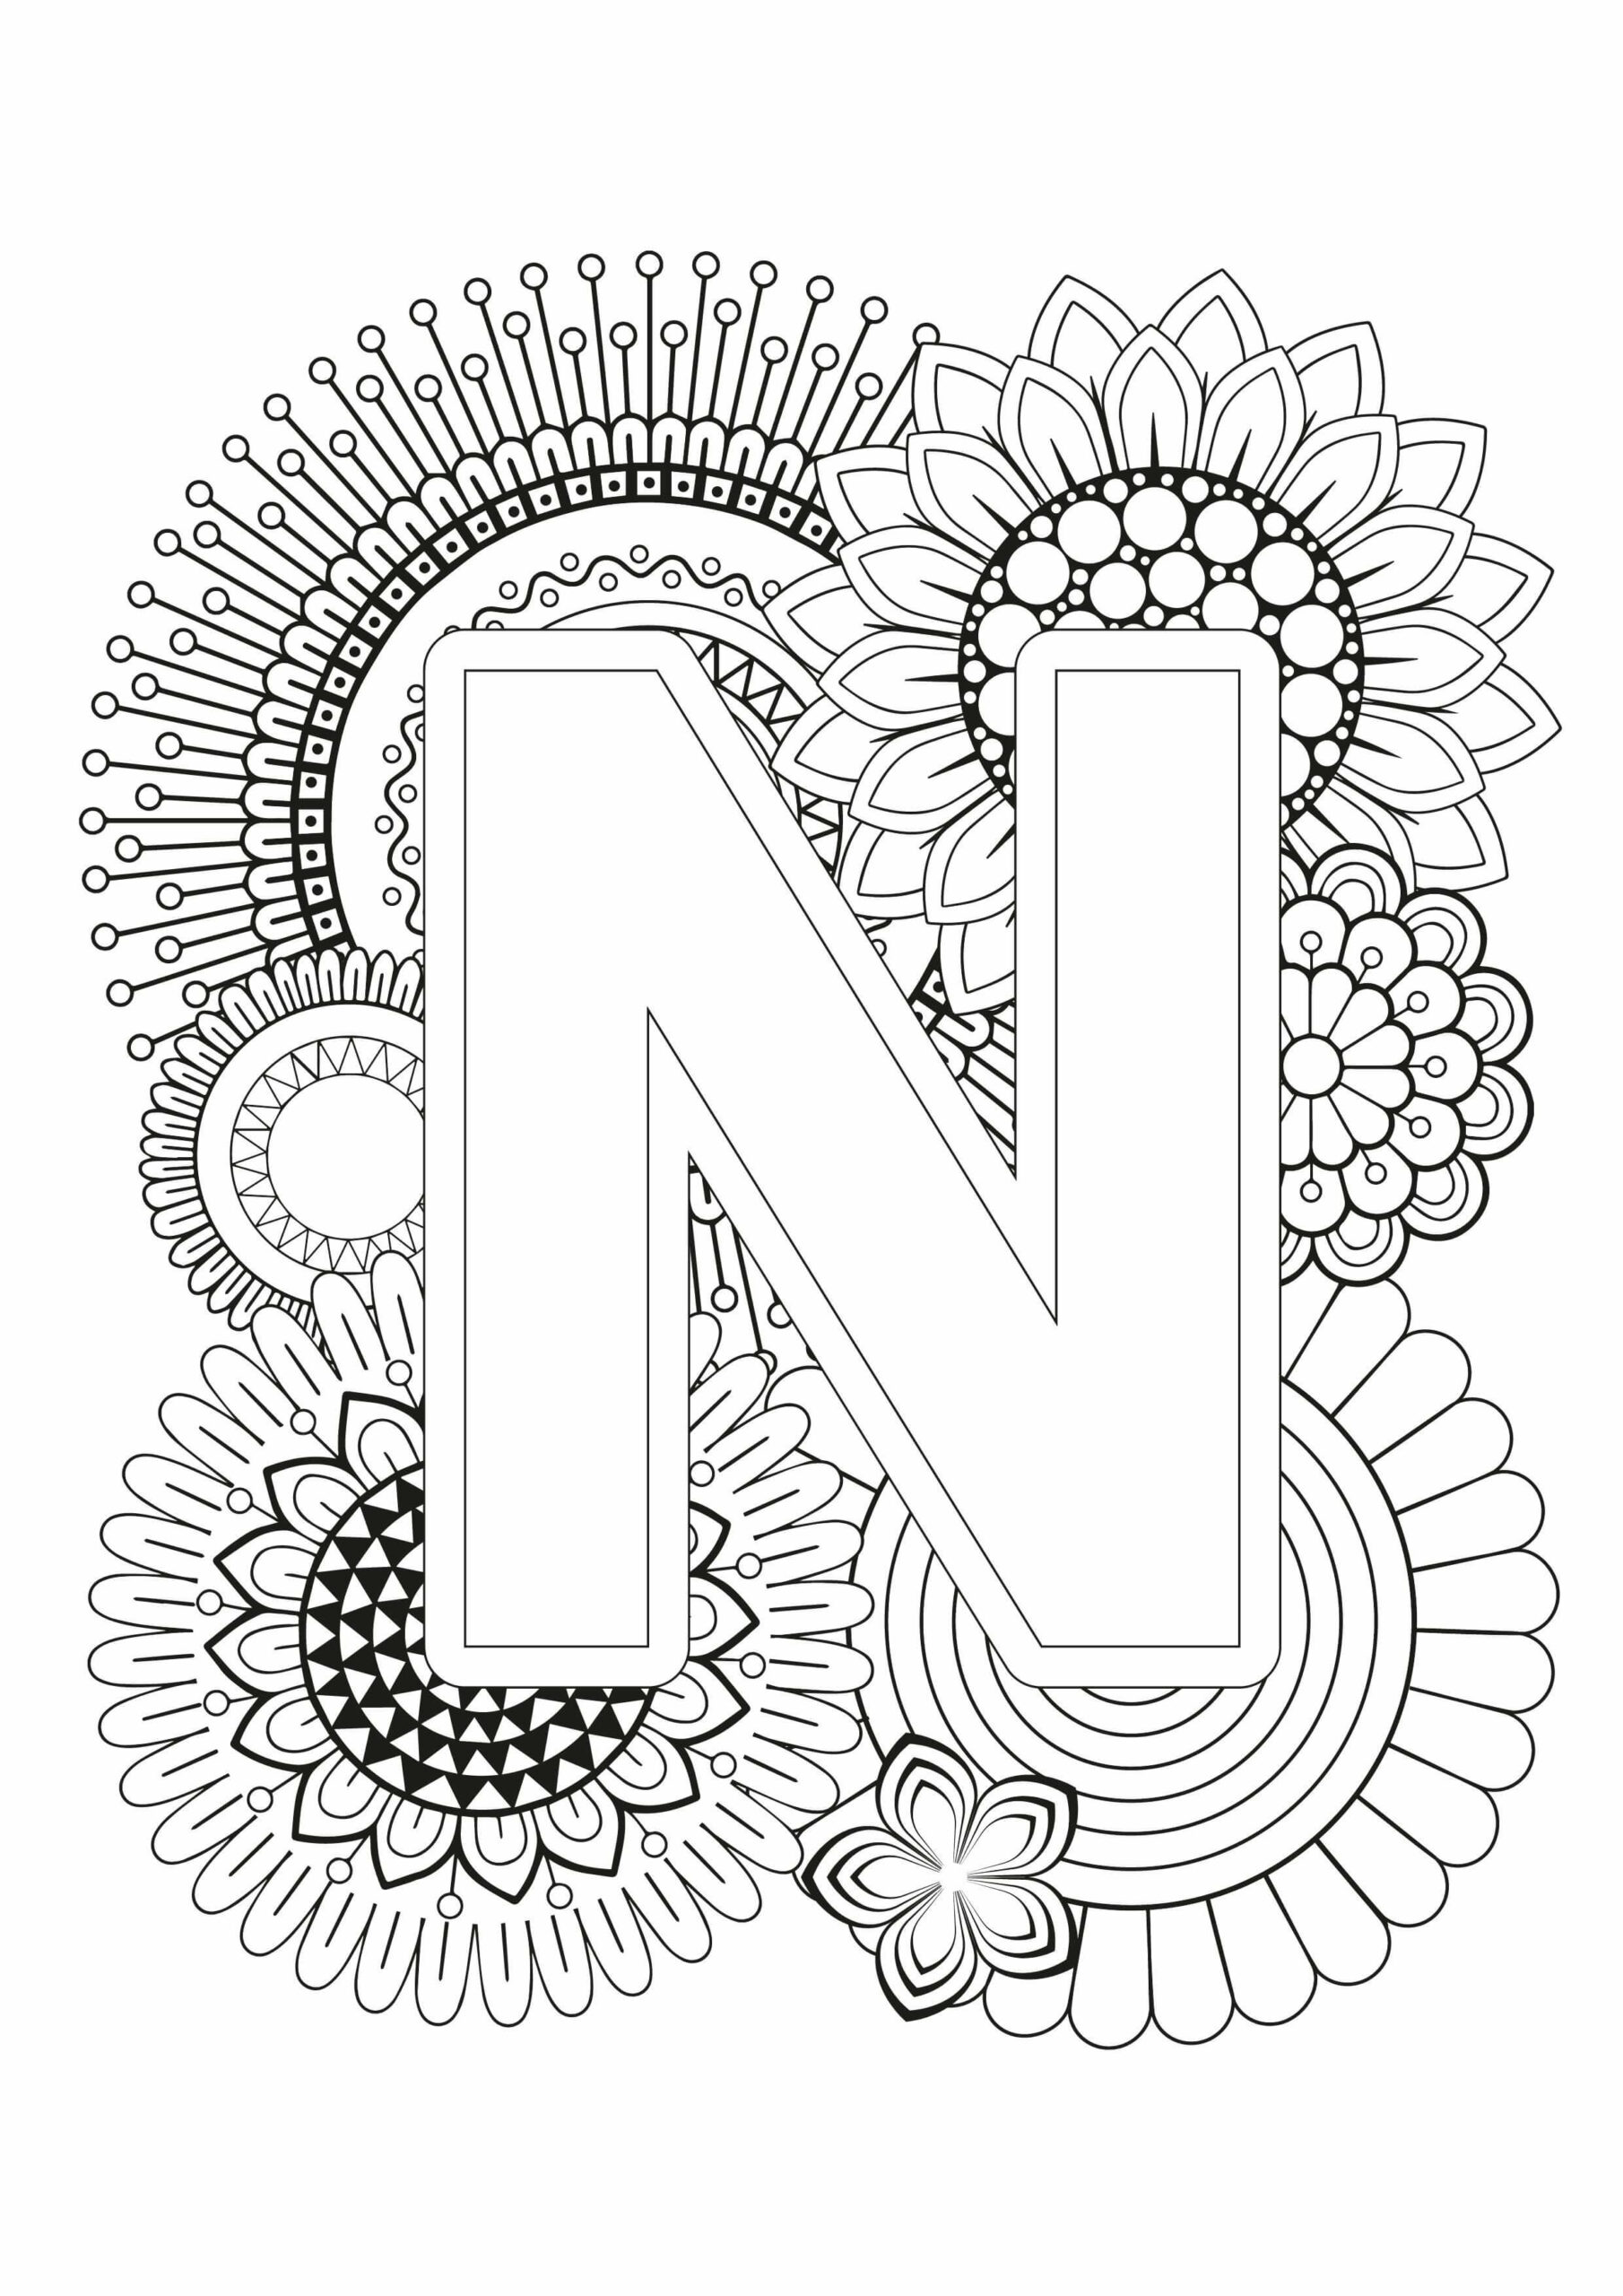 Mandala Letter N Coloring Page - Download, Print Now!